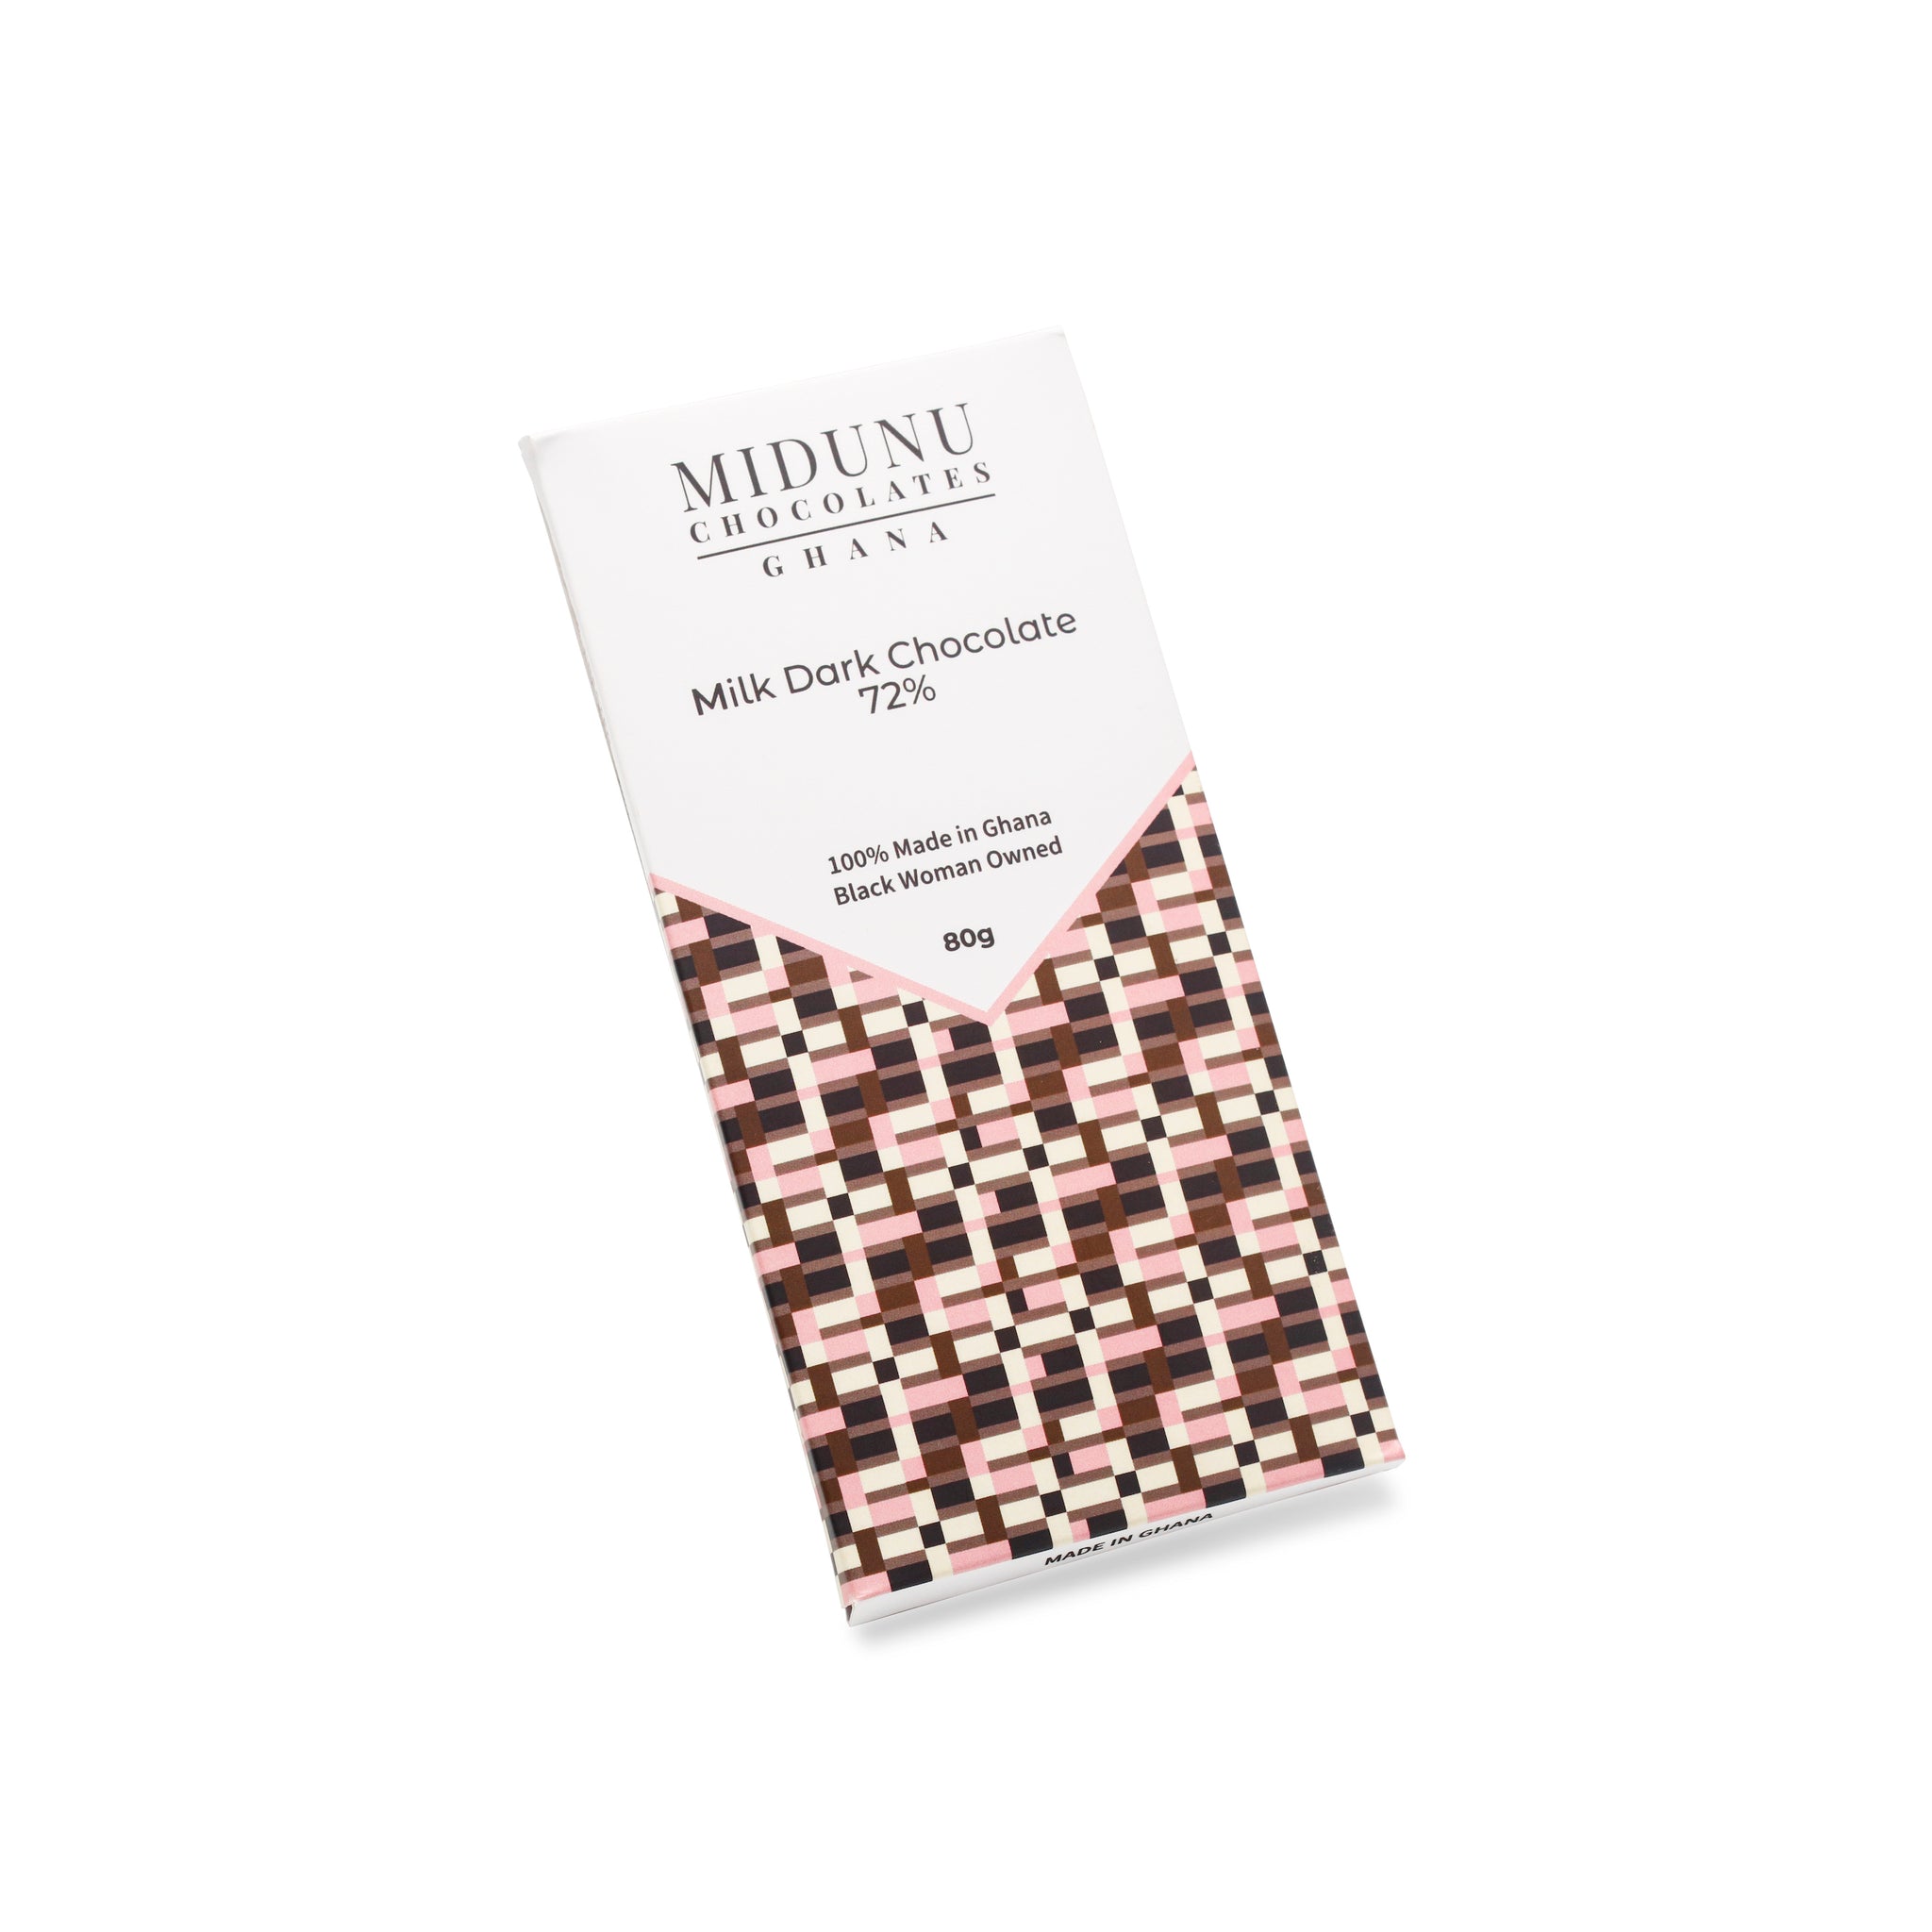 Midunu Chocolates are created by an award winning chef in Accra, Ghana. The traditional method of fermenting cocoa beans in plantain and banana leaves instills a unique flavor.  In this single origin bar, expect intense cacao and creamy caramel notes.